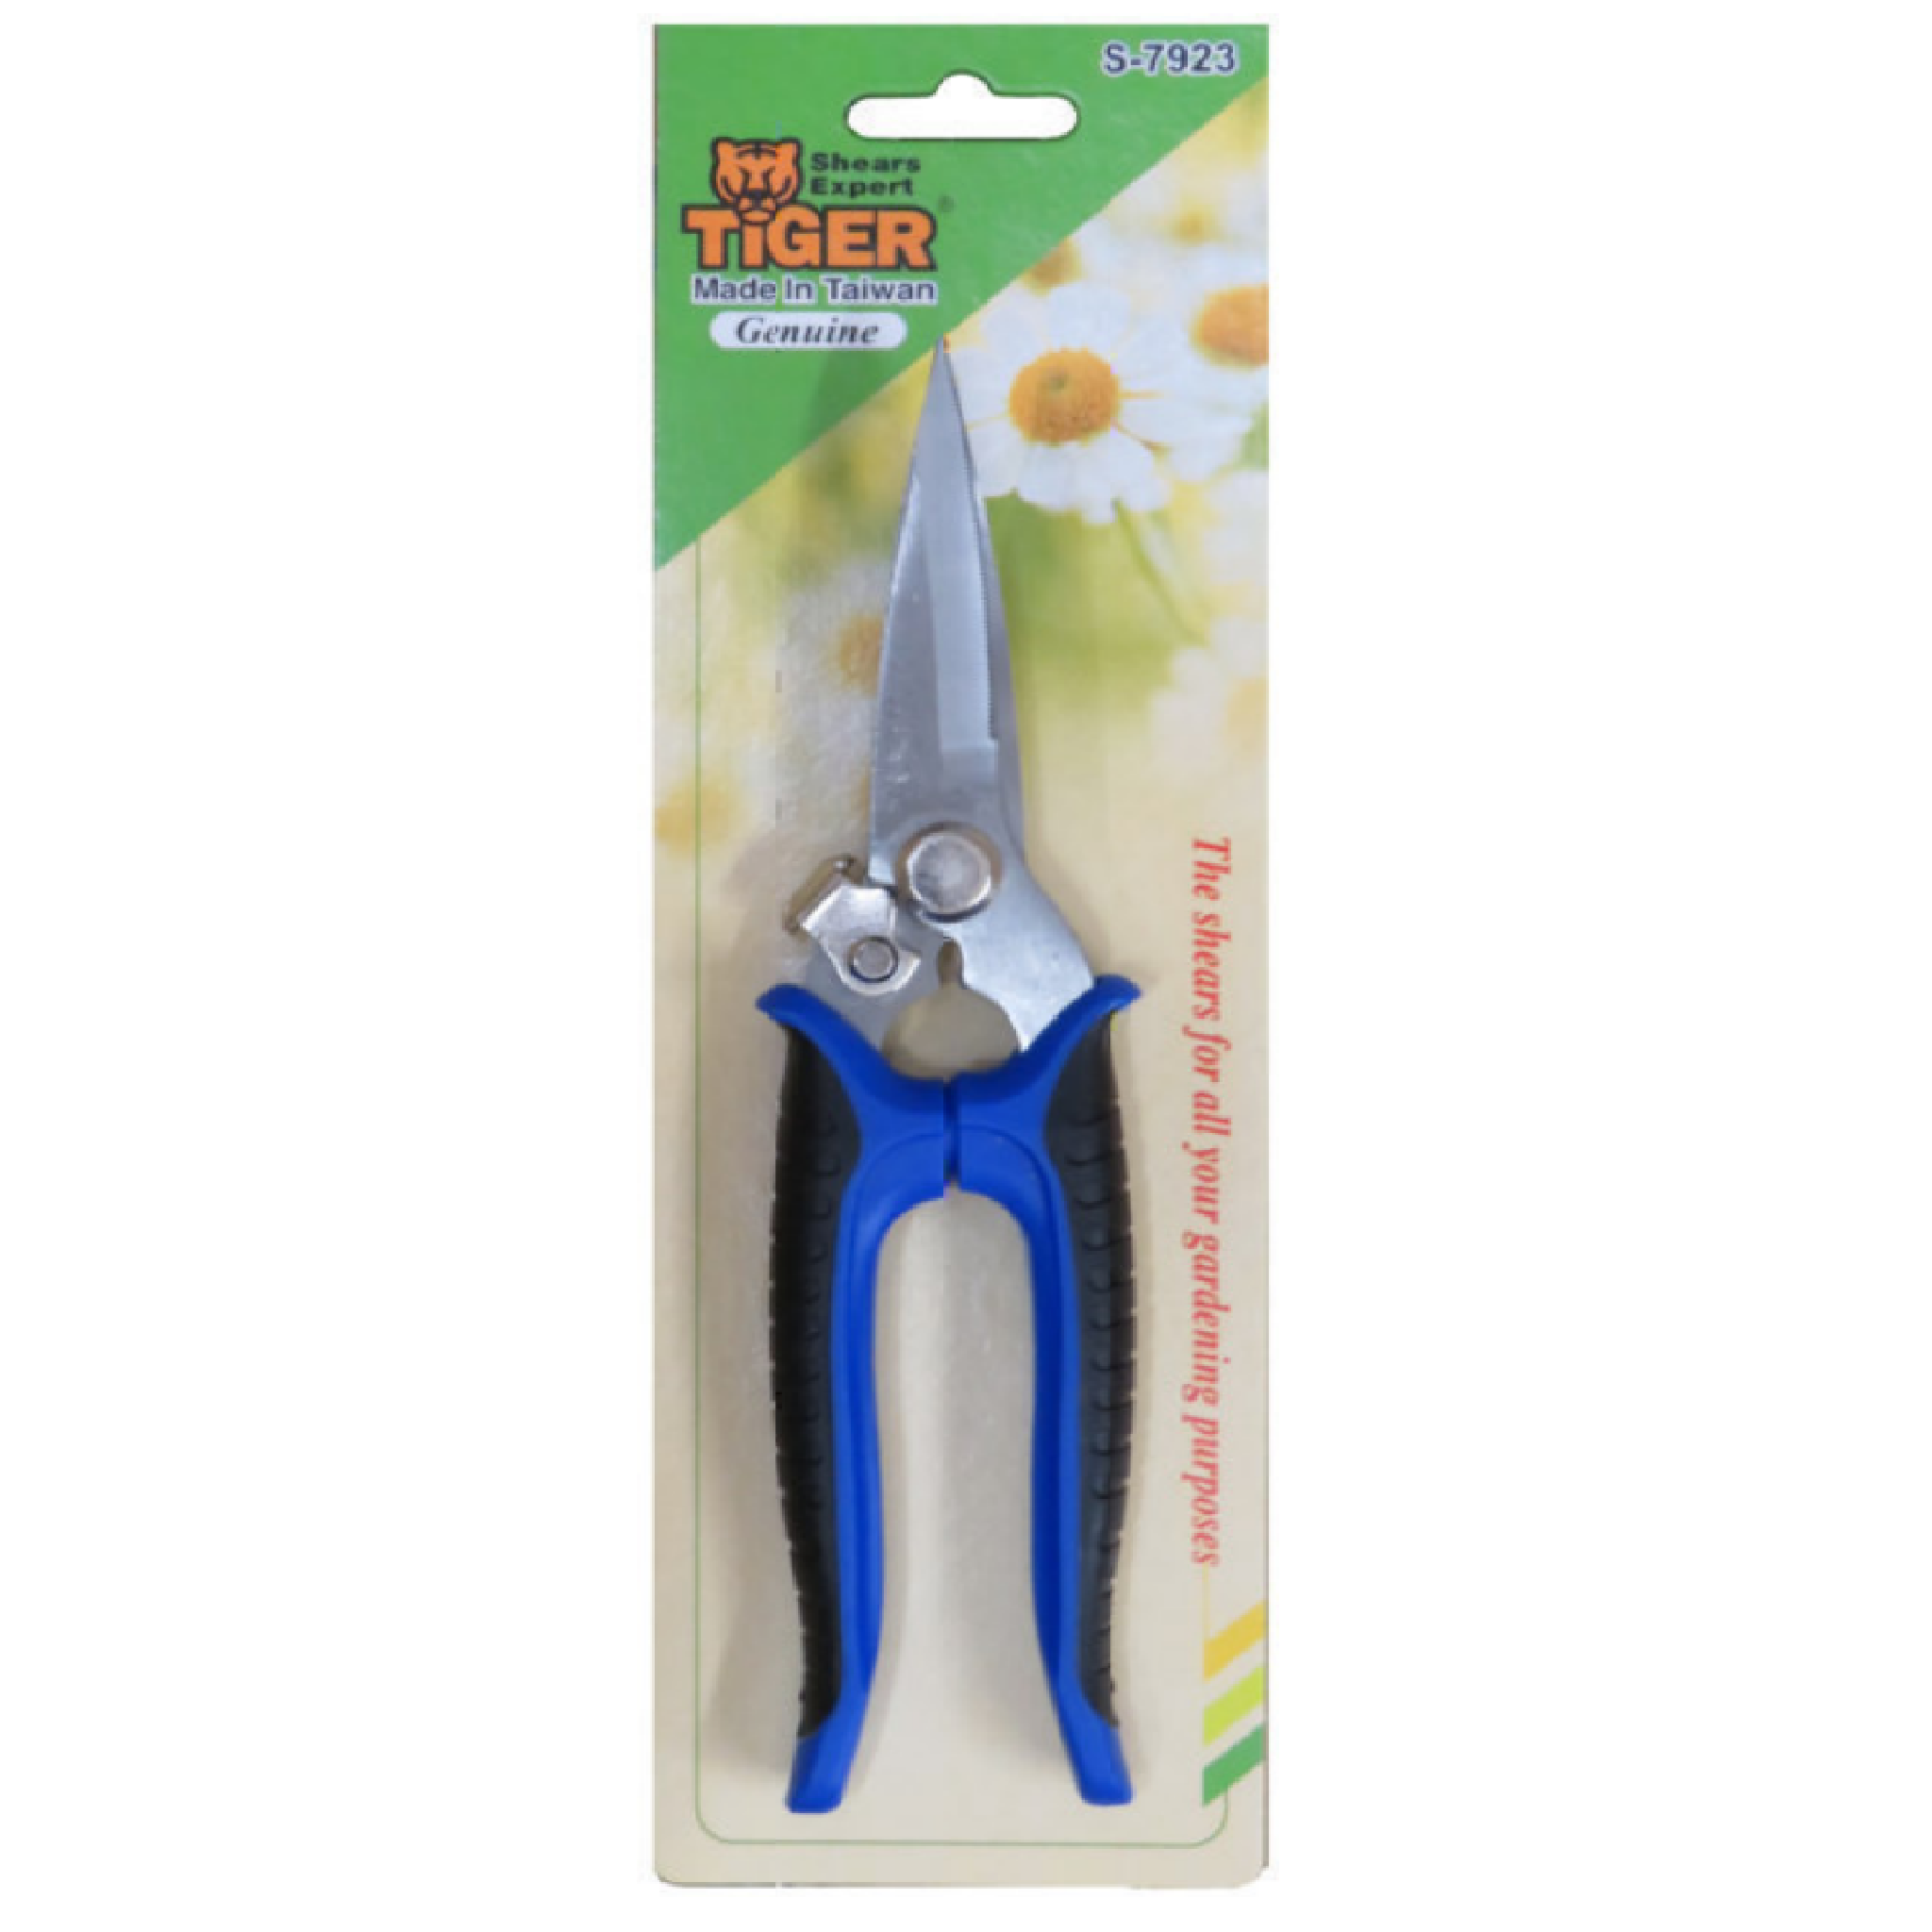 Tiger S7923 Stainless Steel Branch STRAIGHT Pruning Shear 8"